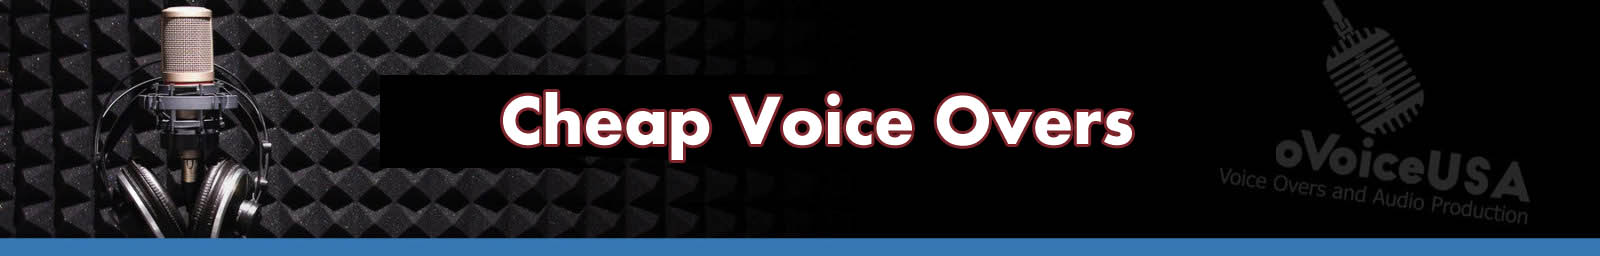 Cheap Voice Overs | American Voice Recording Service | ProVoice USA